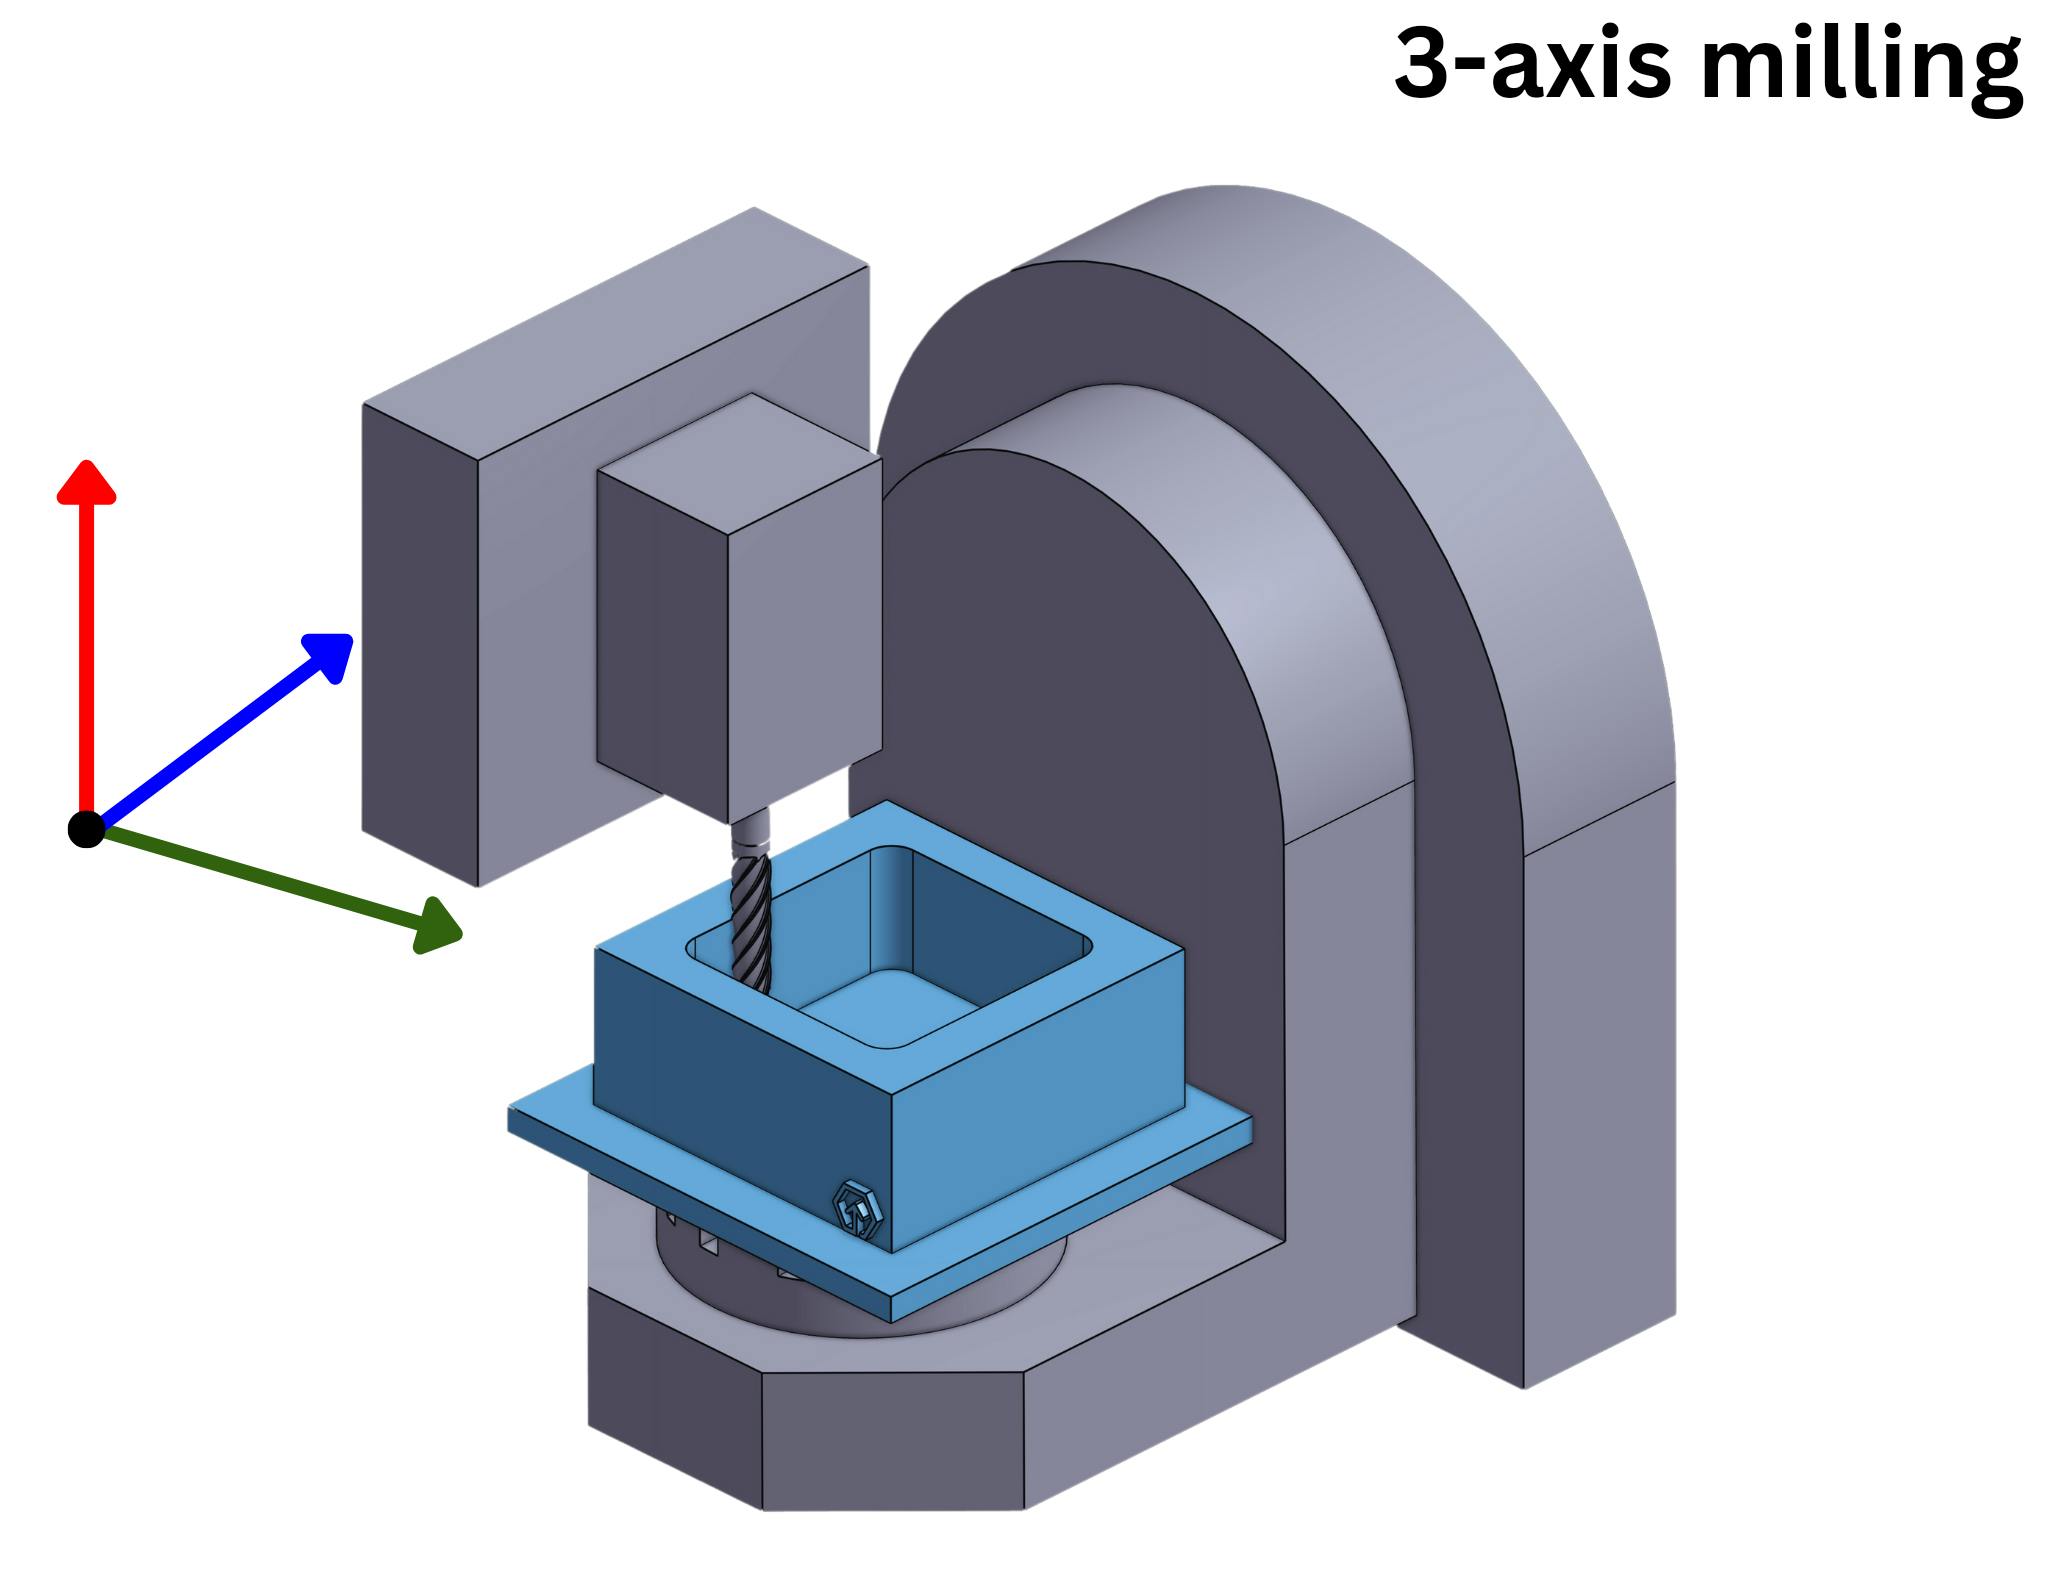 3-axis milling